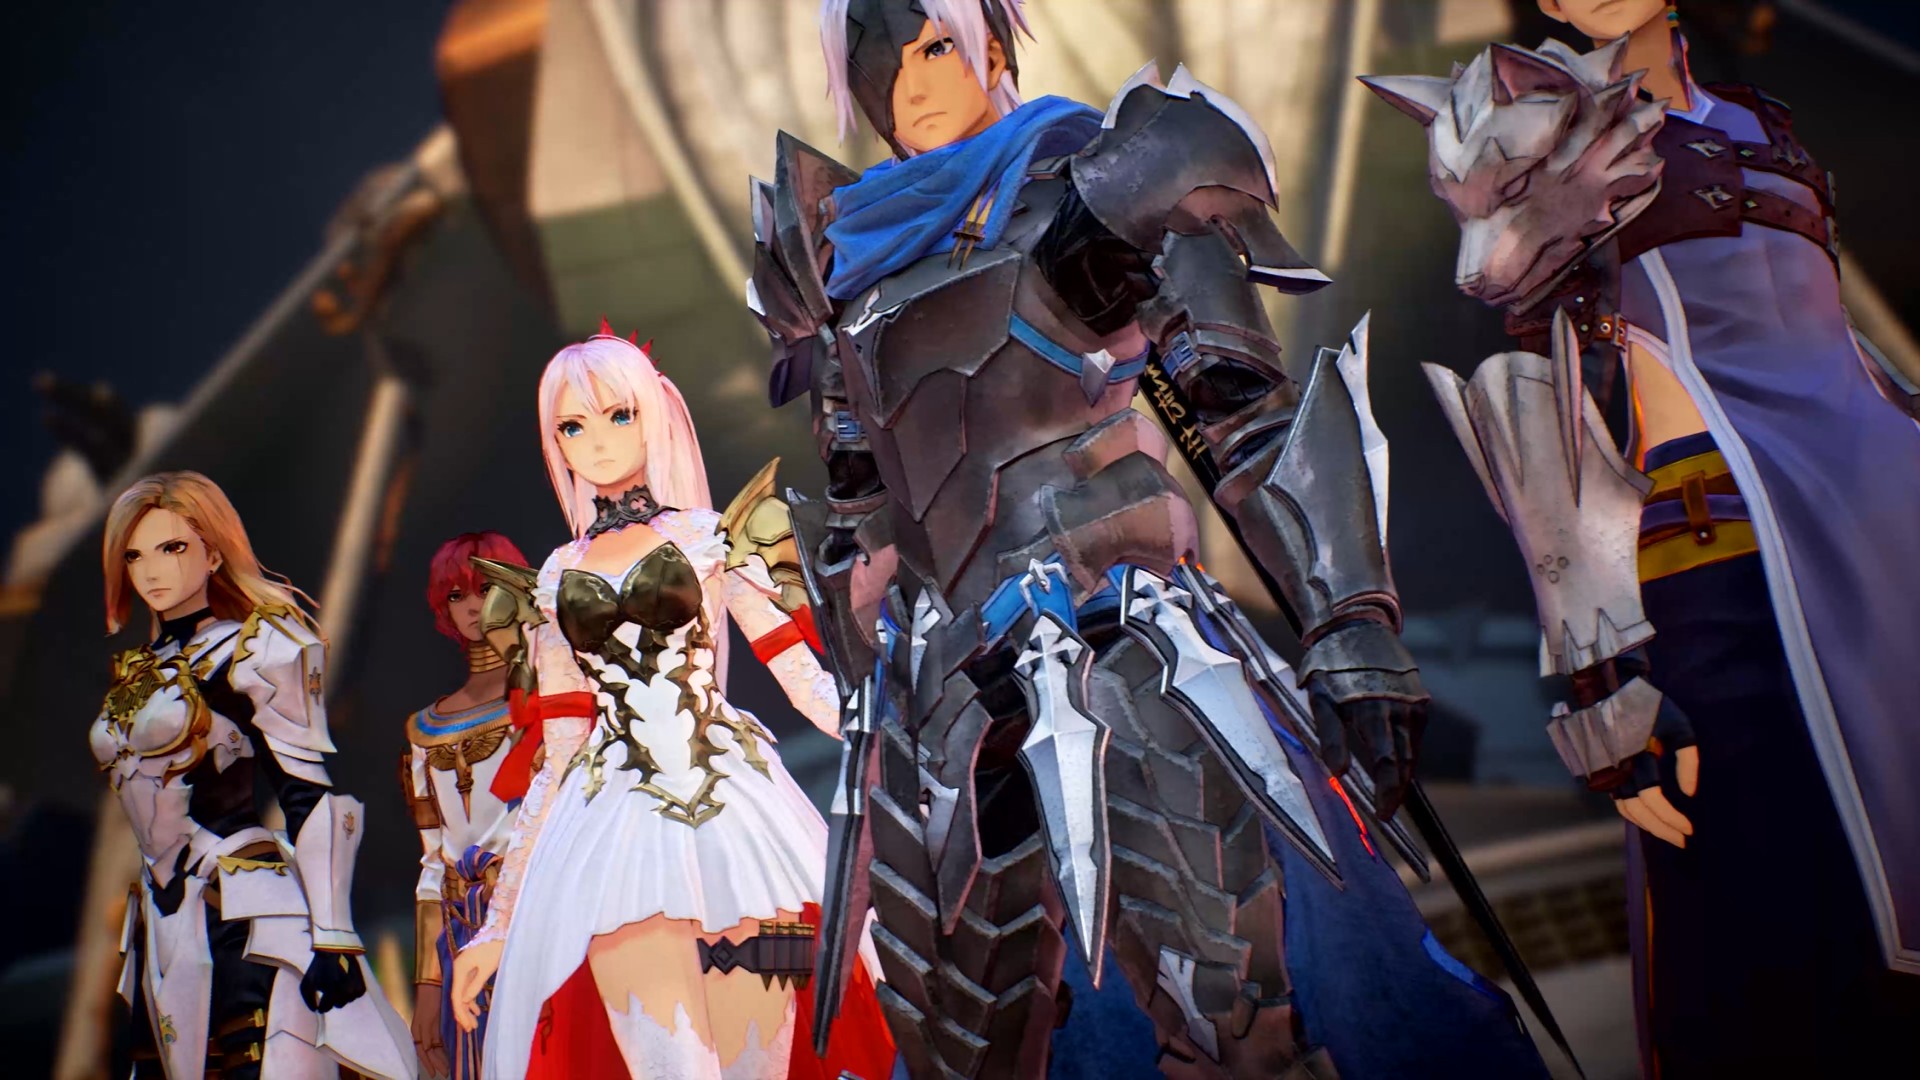 Free Play Days – Tales of Arise, For the King, and Trine 5: A Clockwork  Conspiracy - Xbox Wire